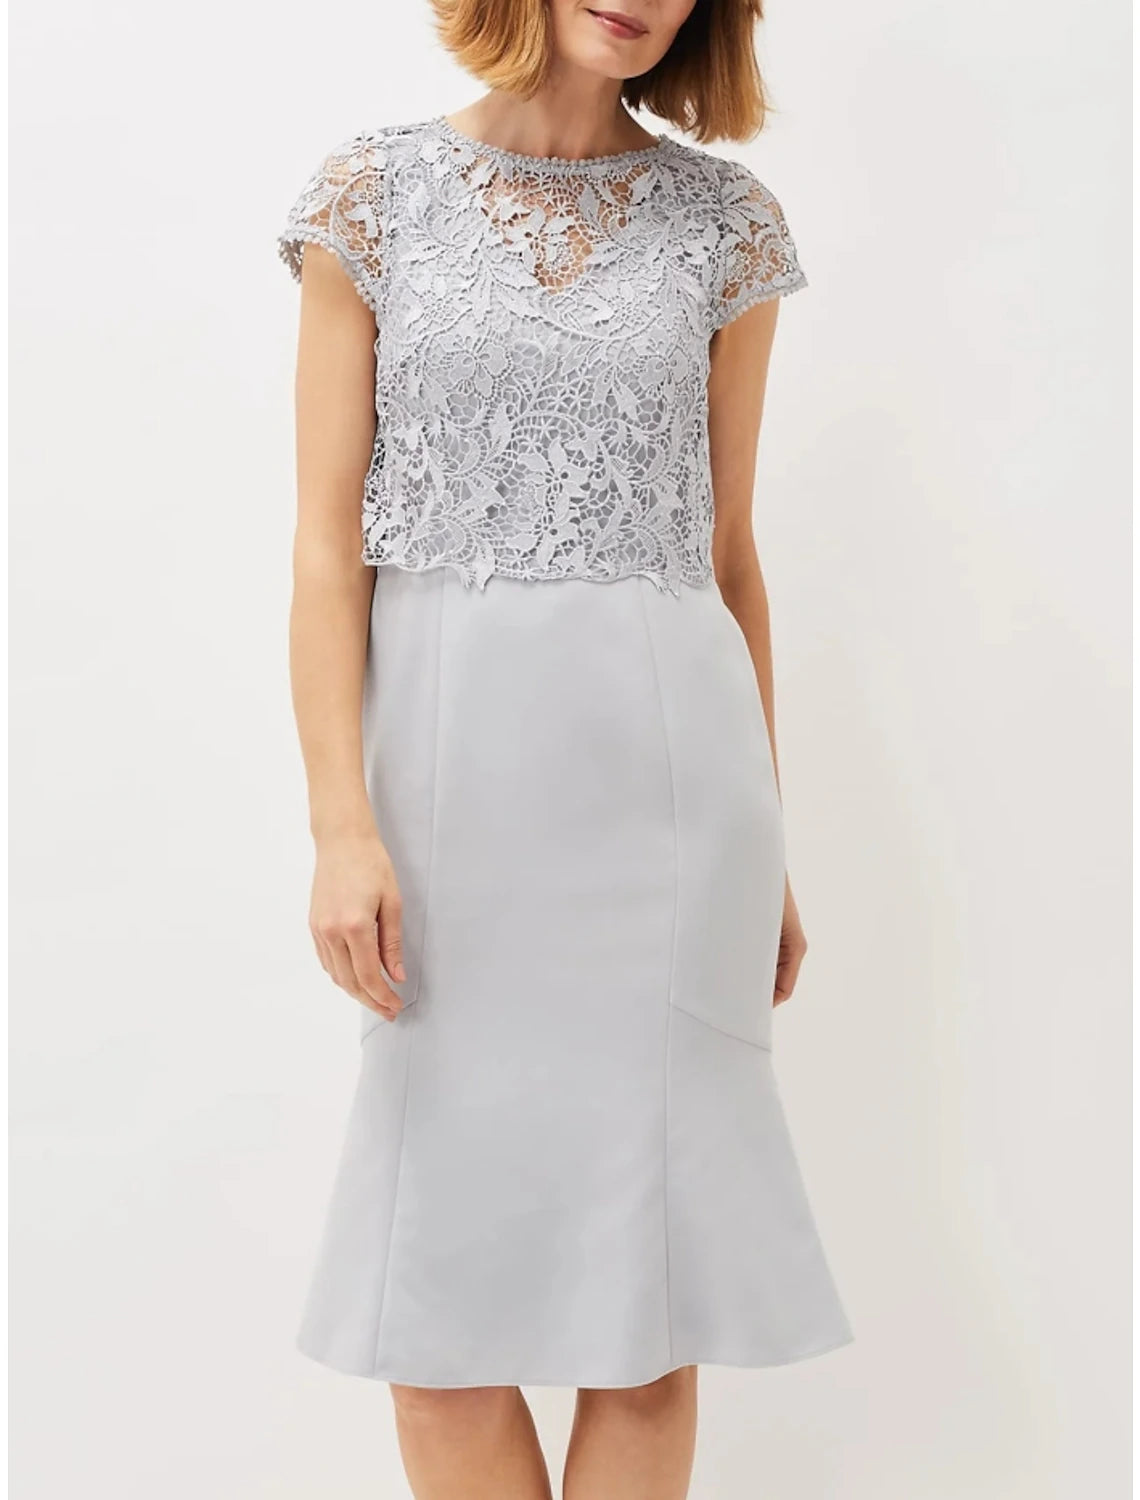 A-Line Mother of the Bride Dress Wedding Guest Elegant Petite Jewel Neck Knee Length Chiffon 3/4 Length Sleeve with Lace Ruching Solid Color